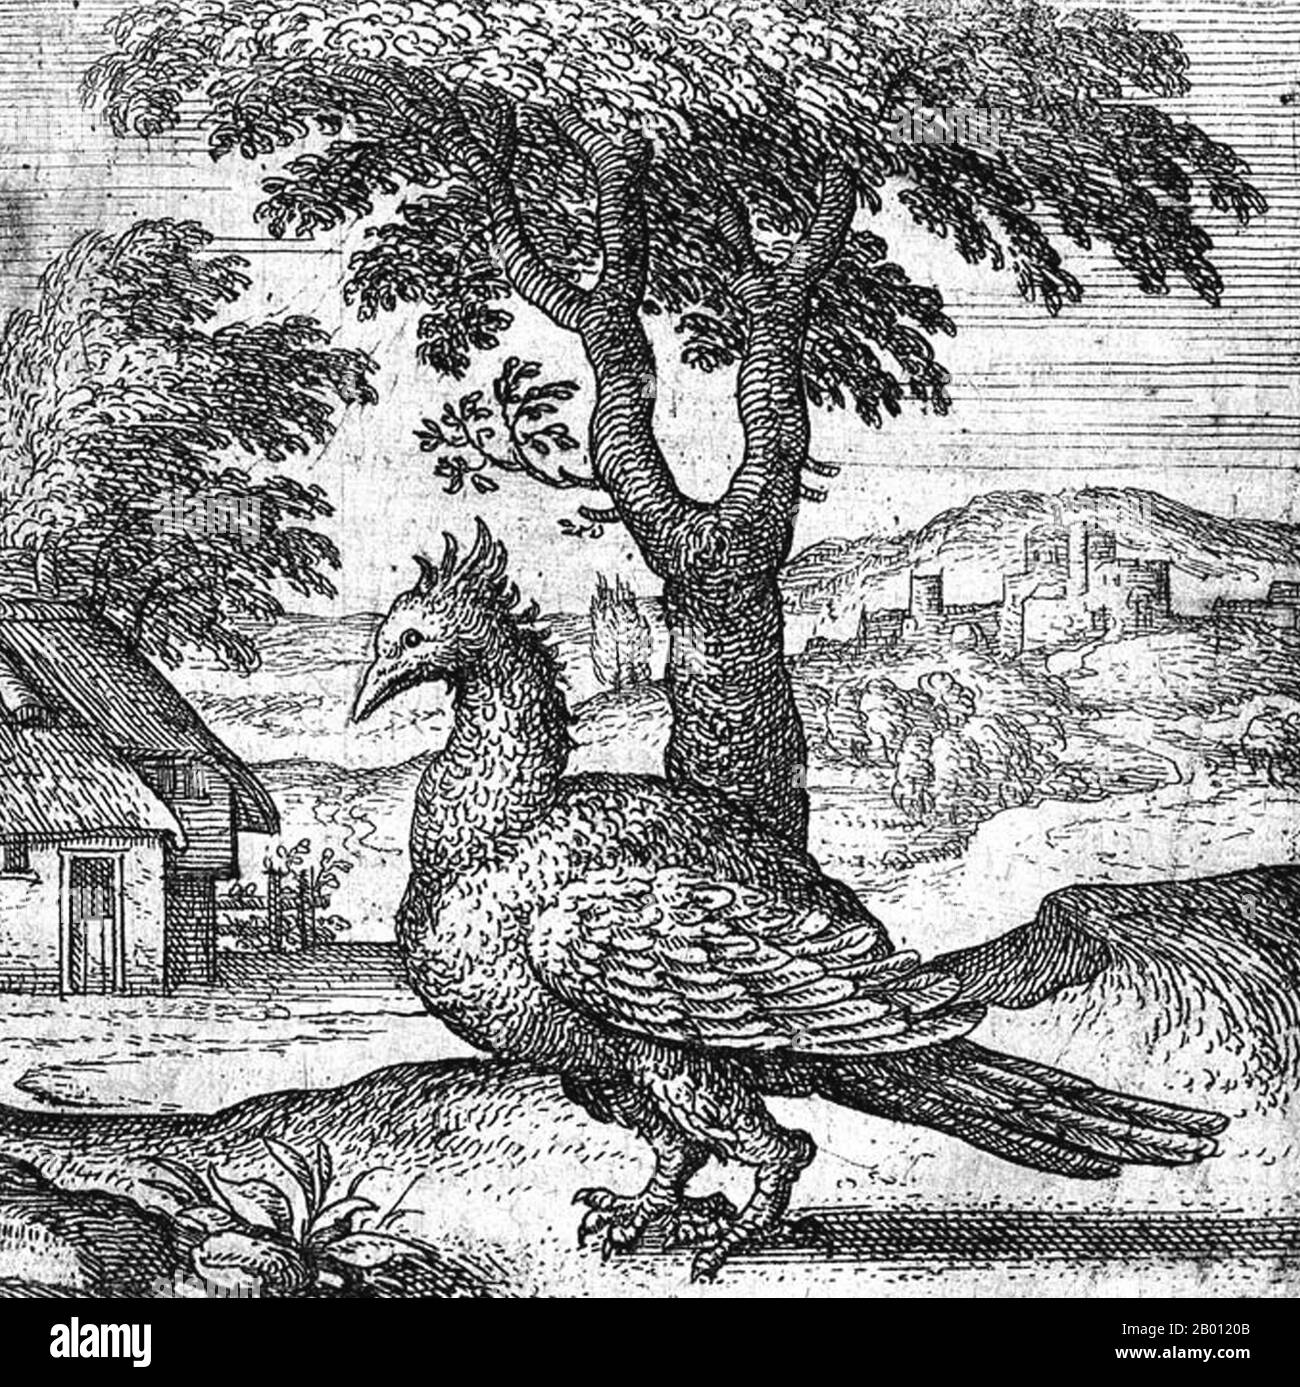 Mythology: A phoenix depicted in a copperplate engraving by Pieter van der Borcht (1530-1608), 1591.  The phoenix is a mythical sacred firebird that can be found in the mythologies of the Persians, Greeks, Romans, Egyptians, Chinese, and (according to Sanchuniathon) Phoenicians.  A phoenix is a mythical bird that is a fire spirit with a colorful plumage and a tail of gold and scarlet (or purple, blue, and green according to some legends). It has a 500 to 1000 year life-cycle, near the end of which it builds itself a nest of twigs that then ignites. The phoenix is then reborn from the ashes. Stock Photo